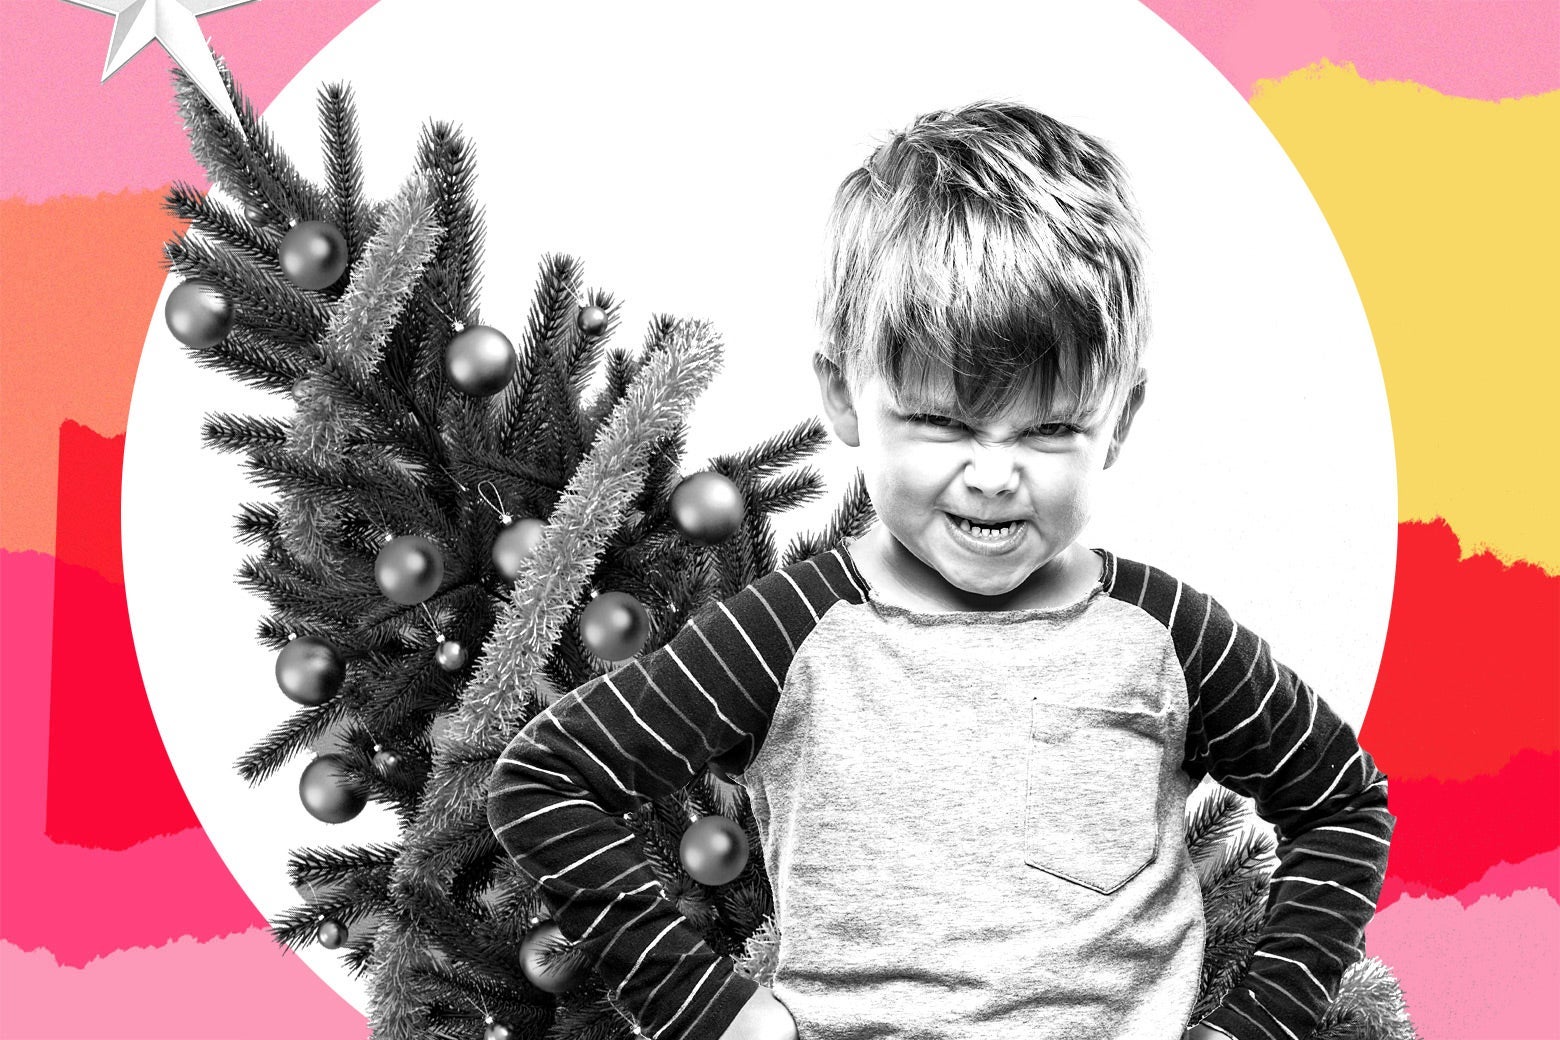 Kids who can’t handle Christmastime without freaking out